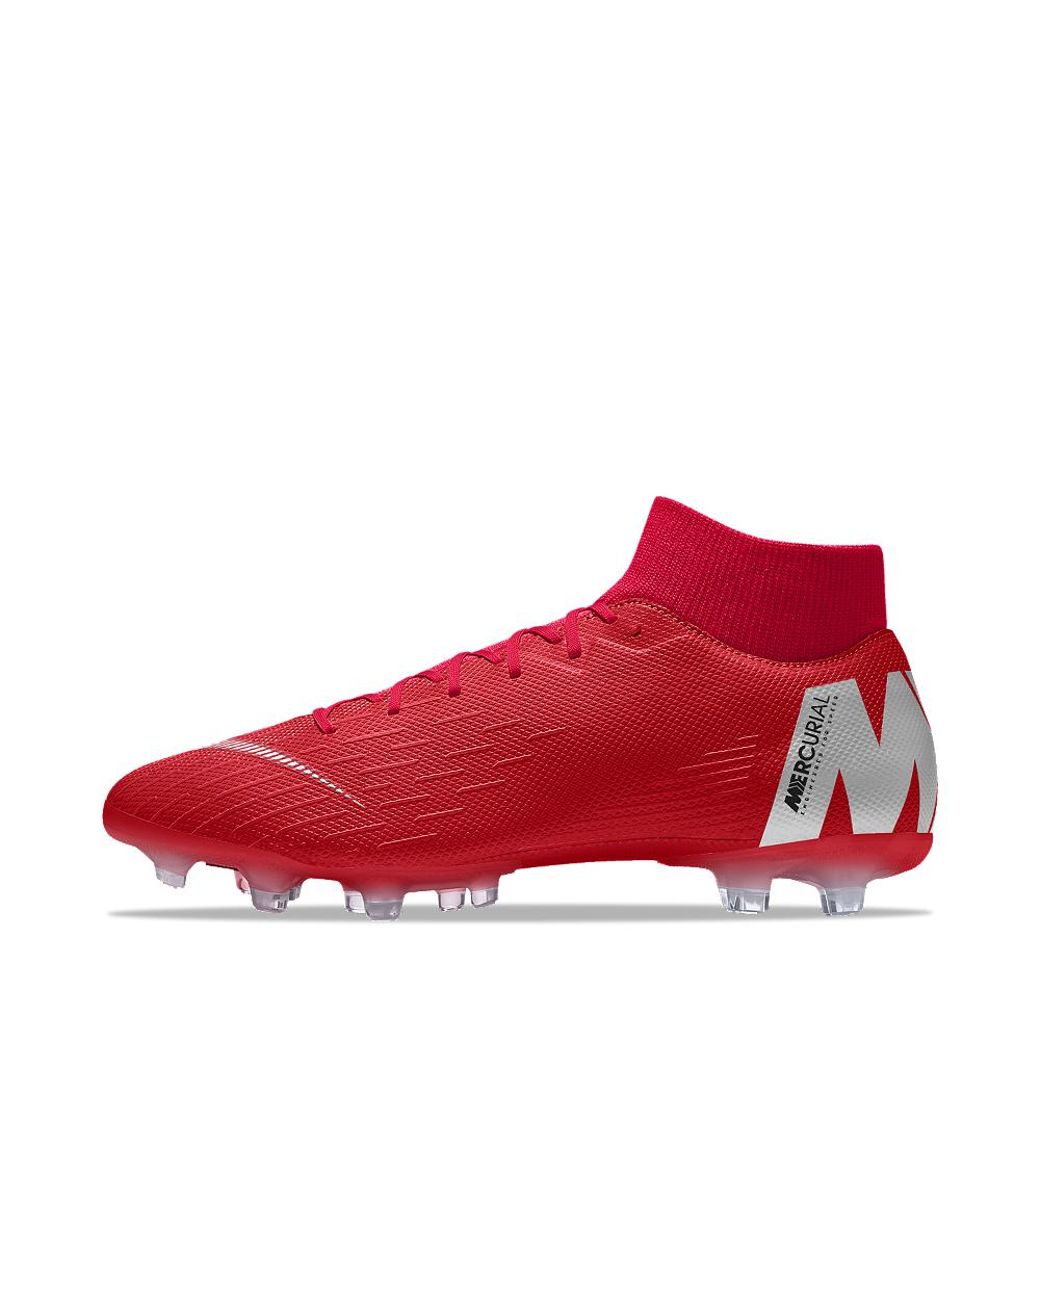 Lyst - Nike Mercurial Superfly Vi Academy Mg Id Multi-ground Soccer Cleats in Red for Men